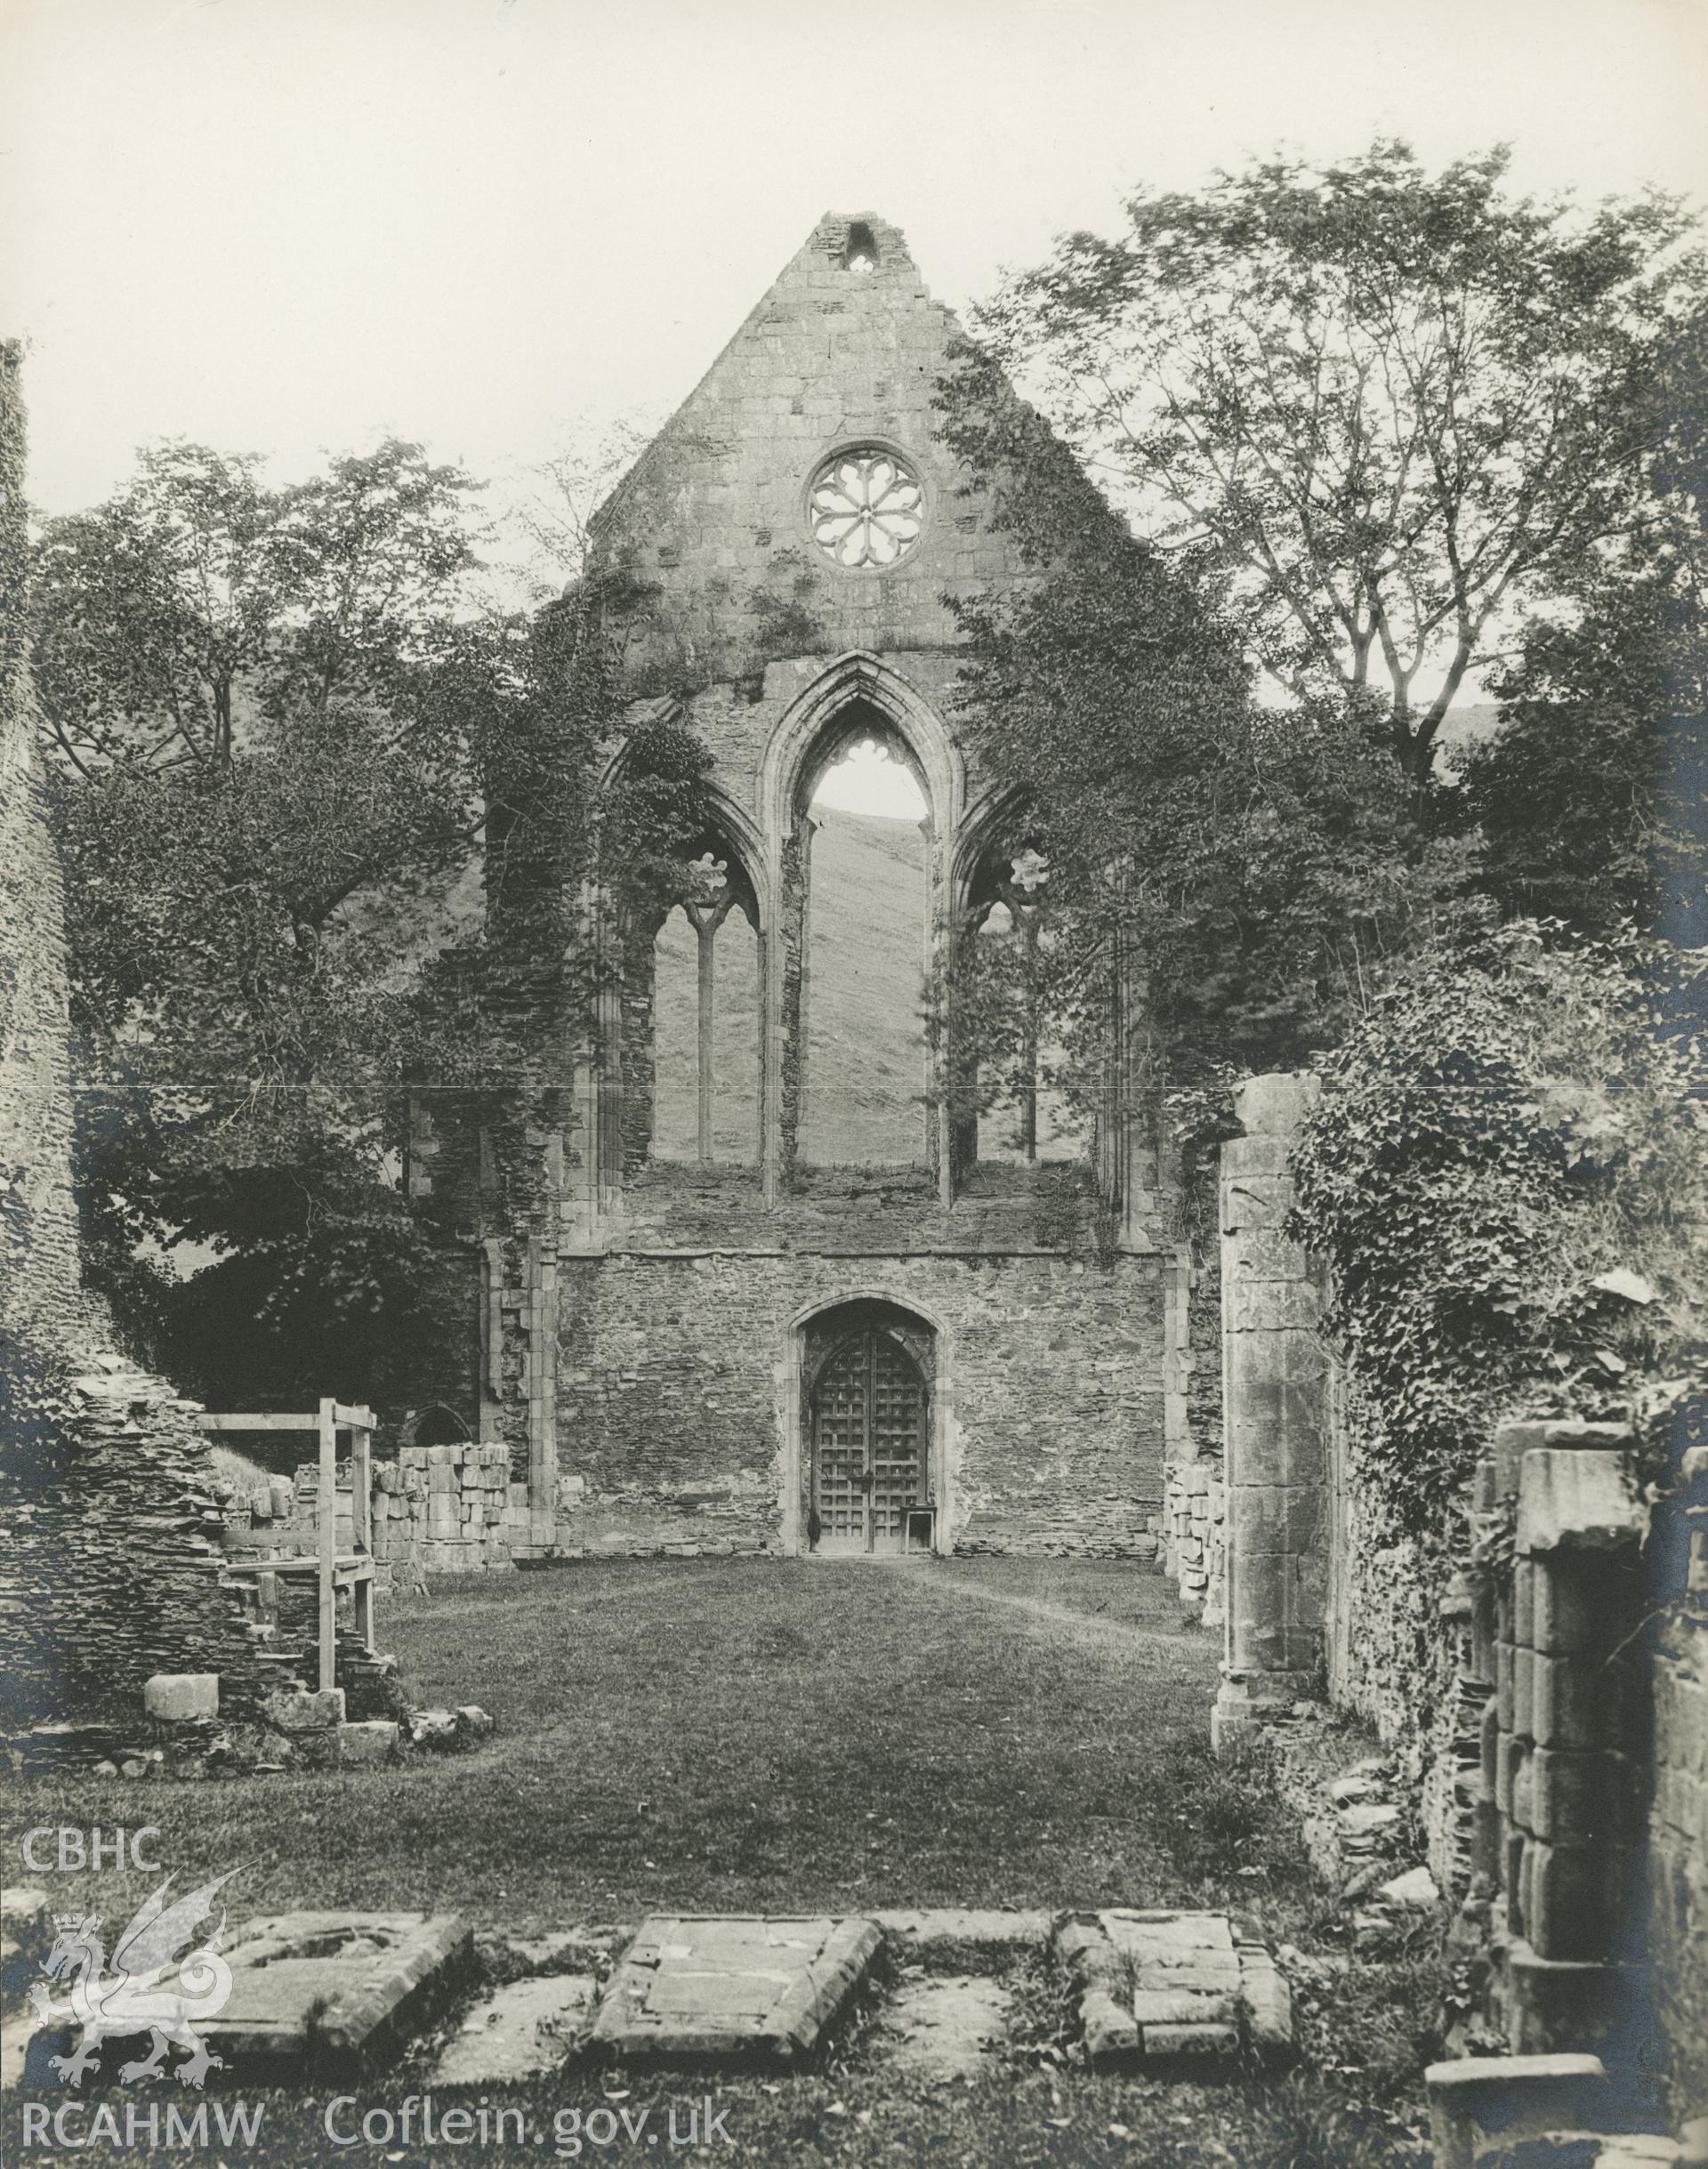 Digitised copy of an undated black and white photograph showing interior view of Valle Crucis Abbey looking east, taken by J. Harold Daniel.